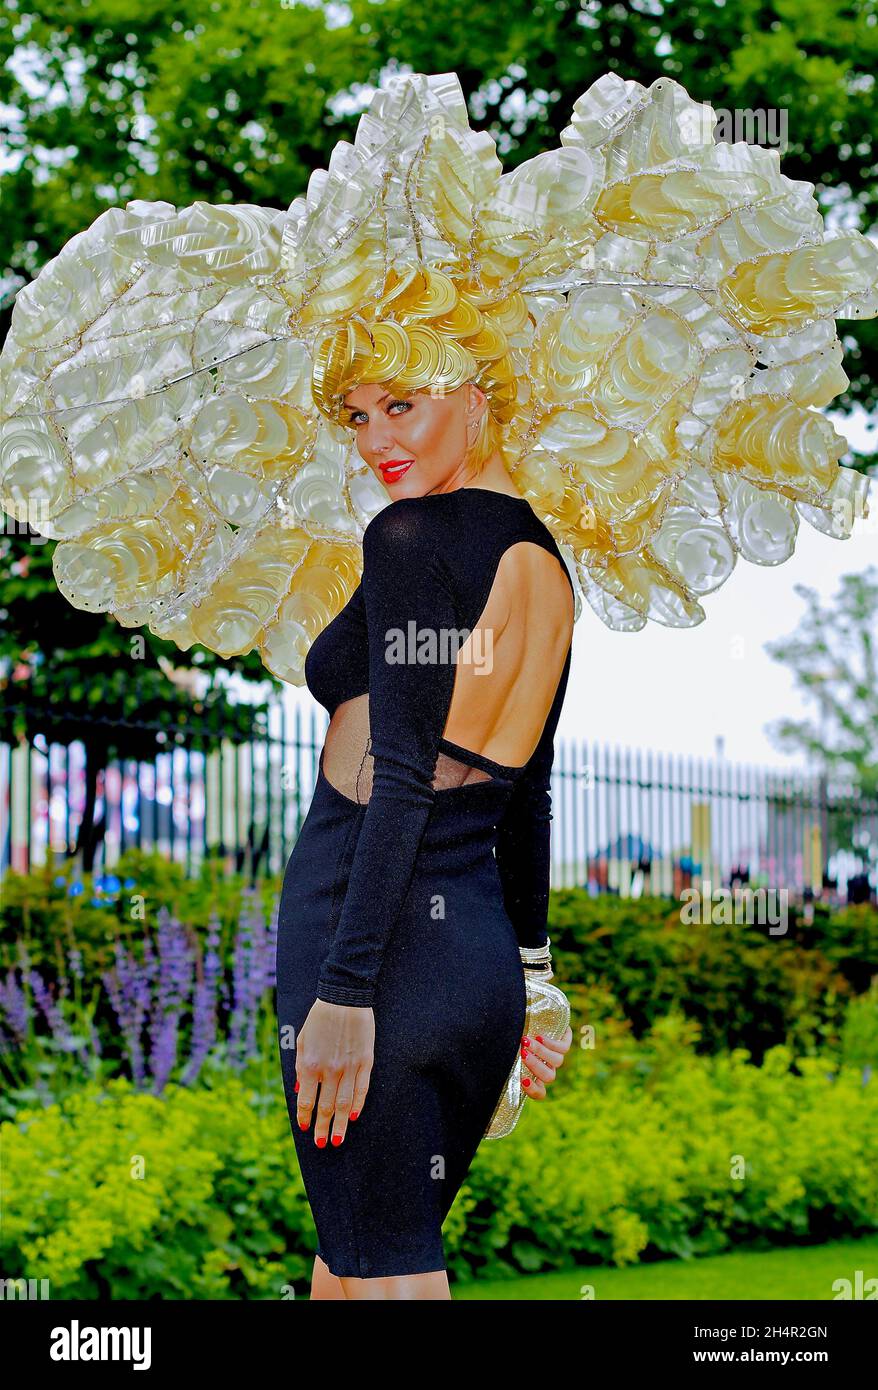 Glamorous lady wears a spectacular hat at Ladies Day Stock Photo